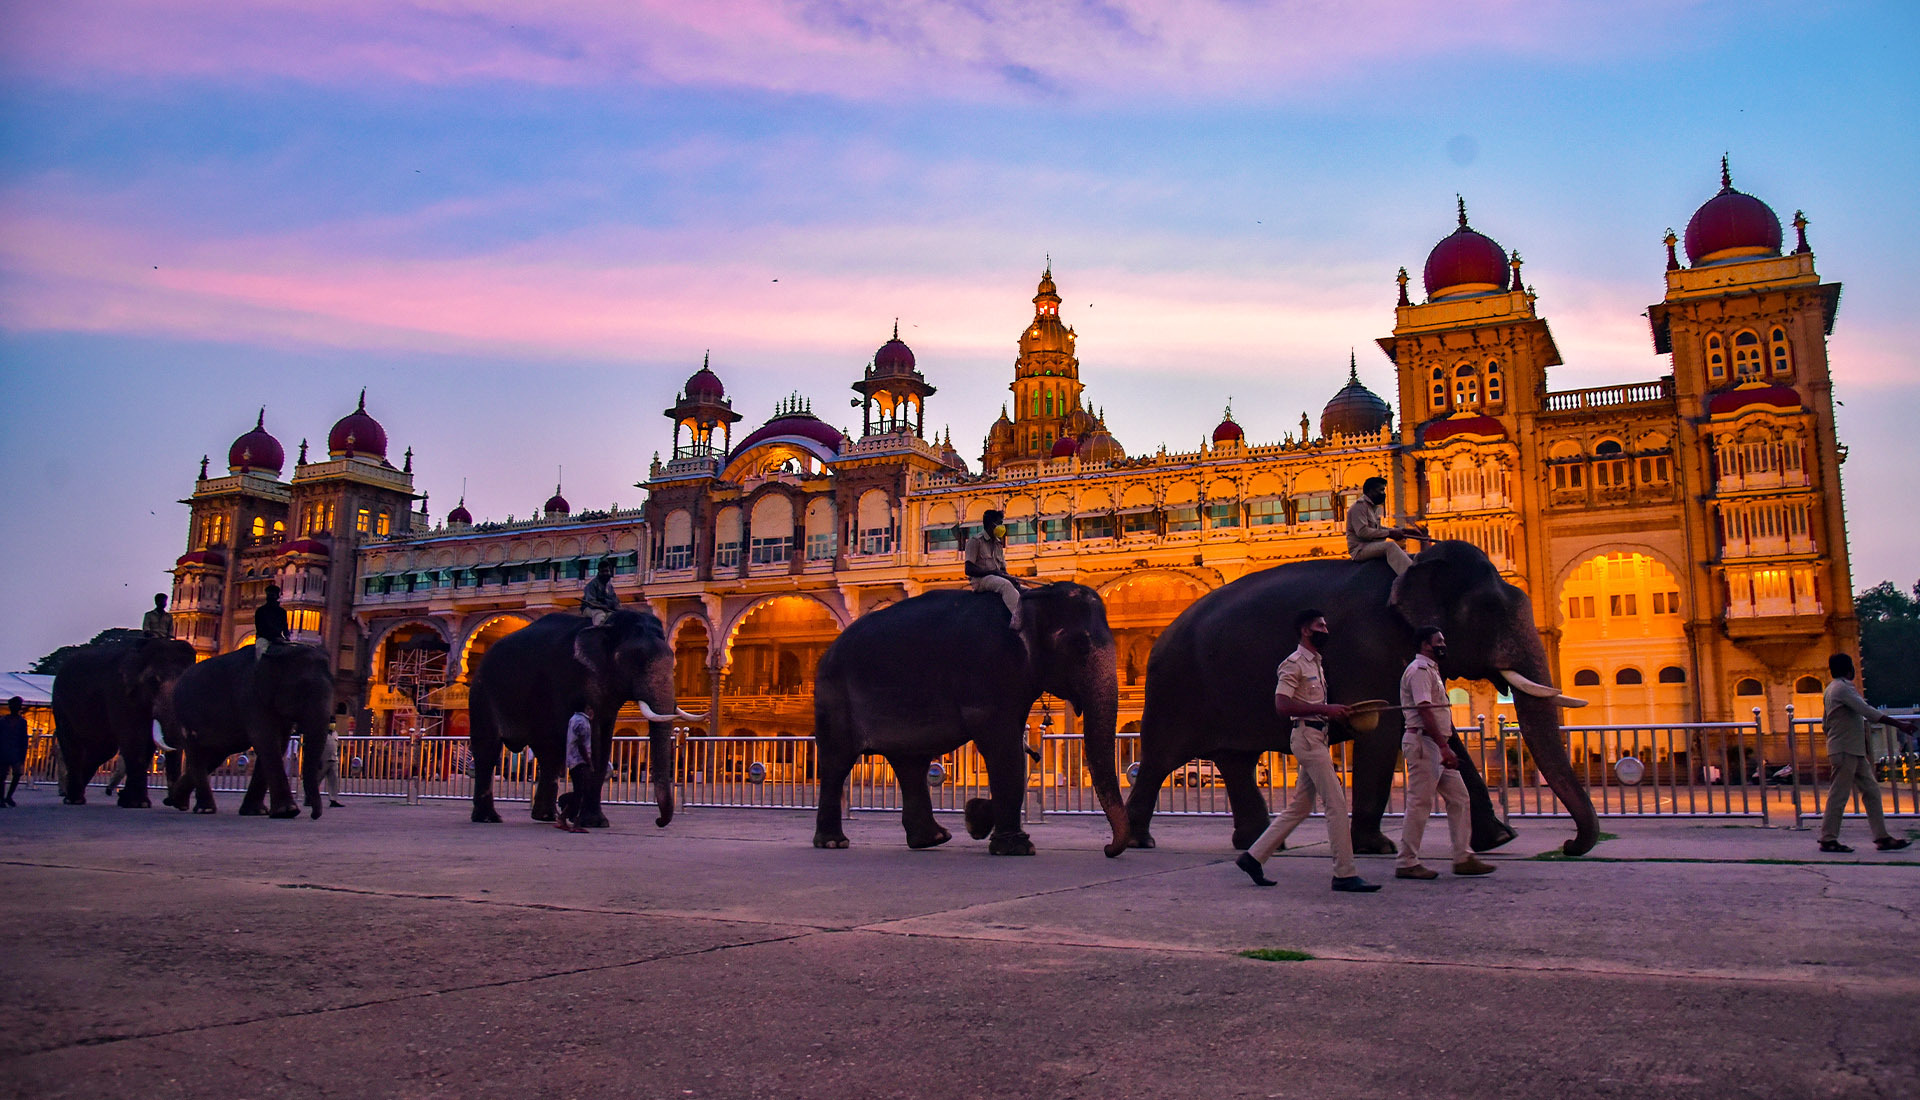 Read more about the article Mysore Dasara – The Colourful Festivities of Mysore